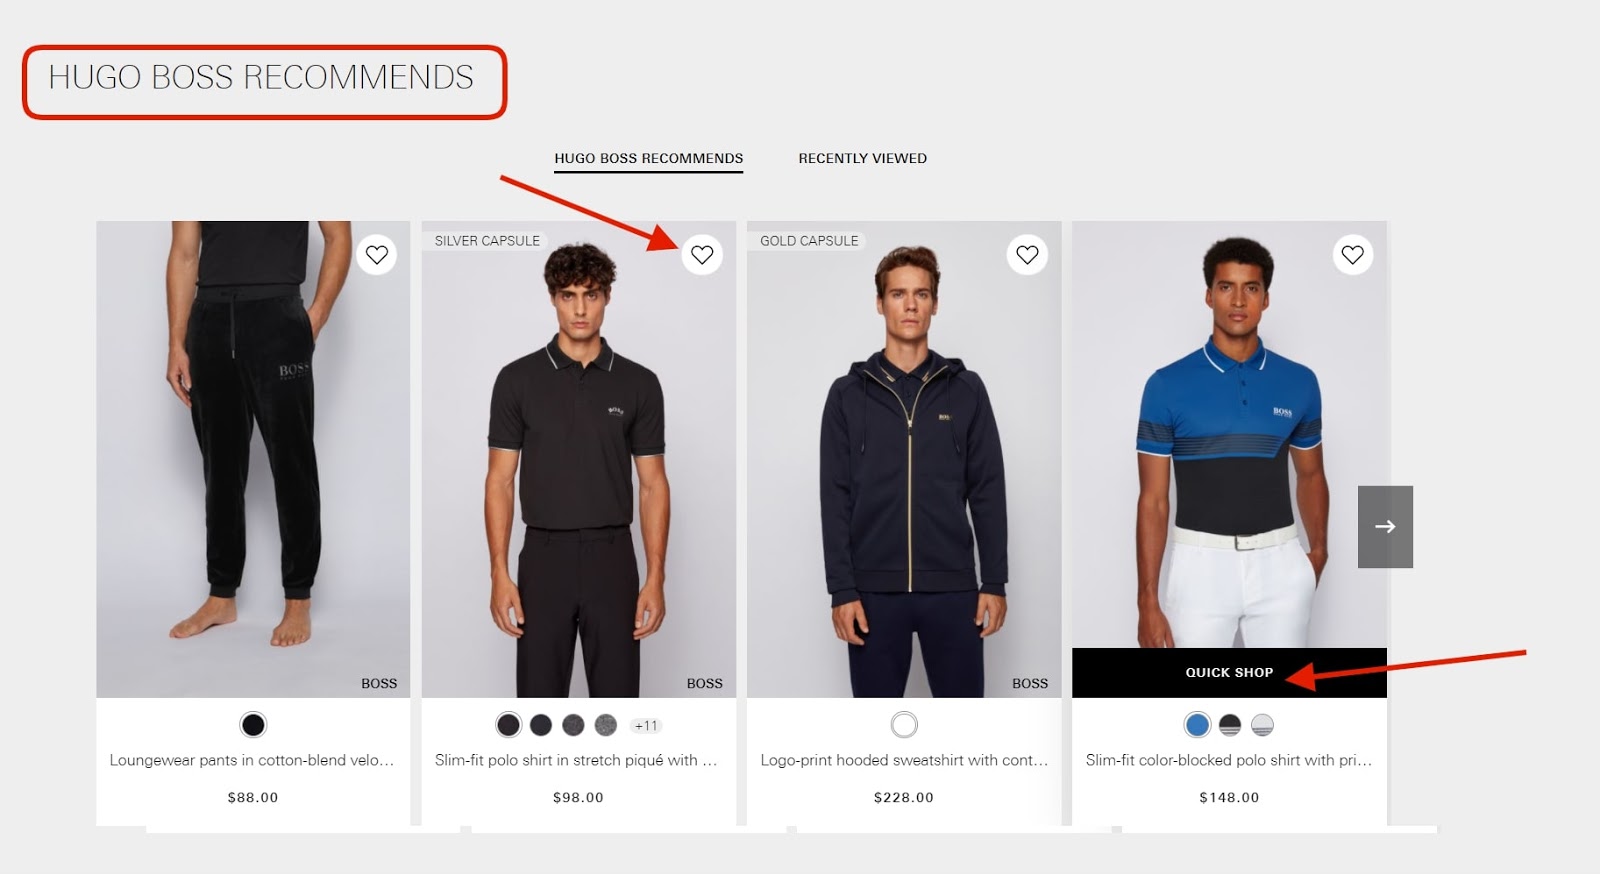  “Hugo Boss Recommends” section on the official Hugo Boss website